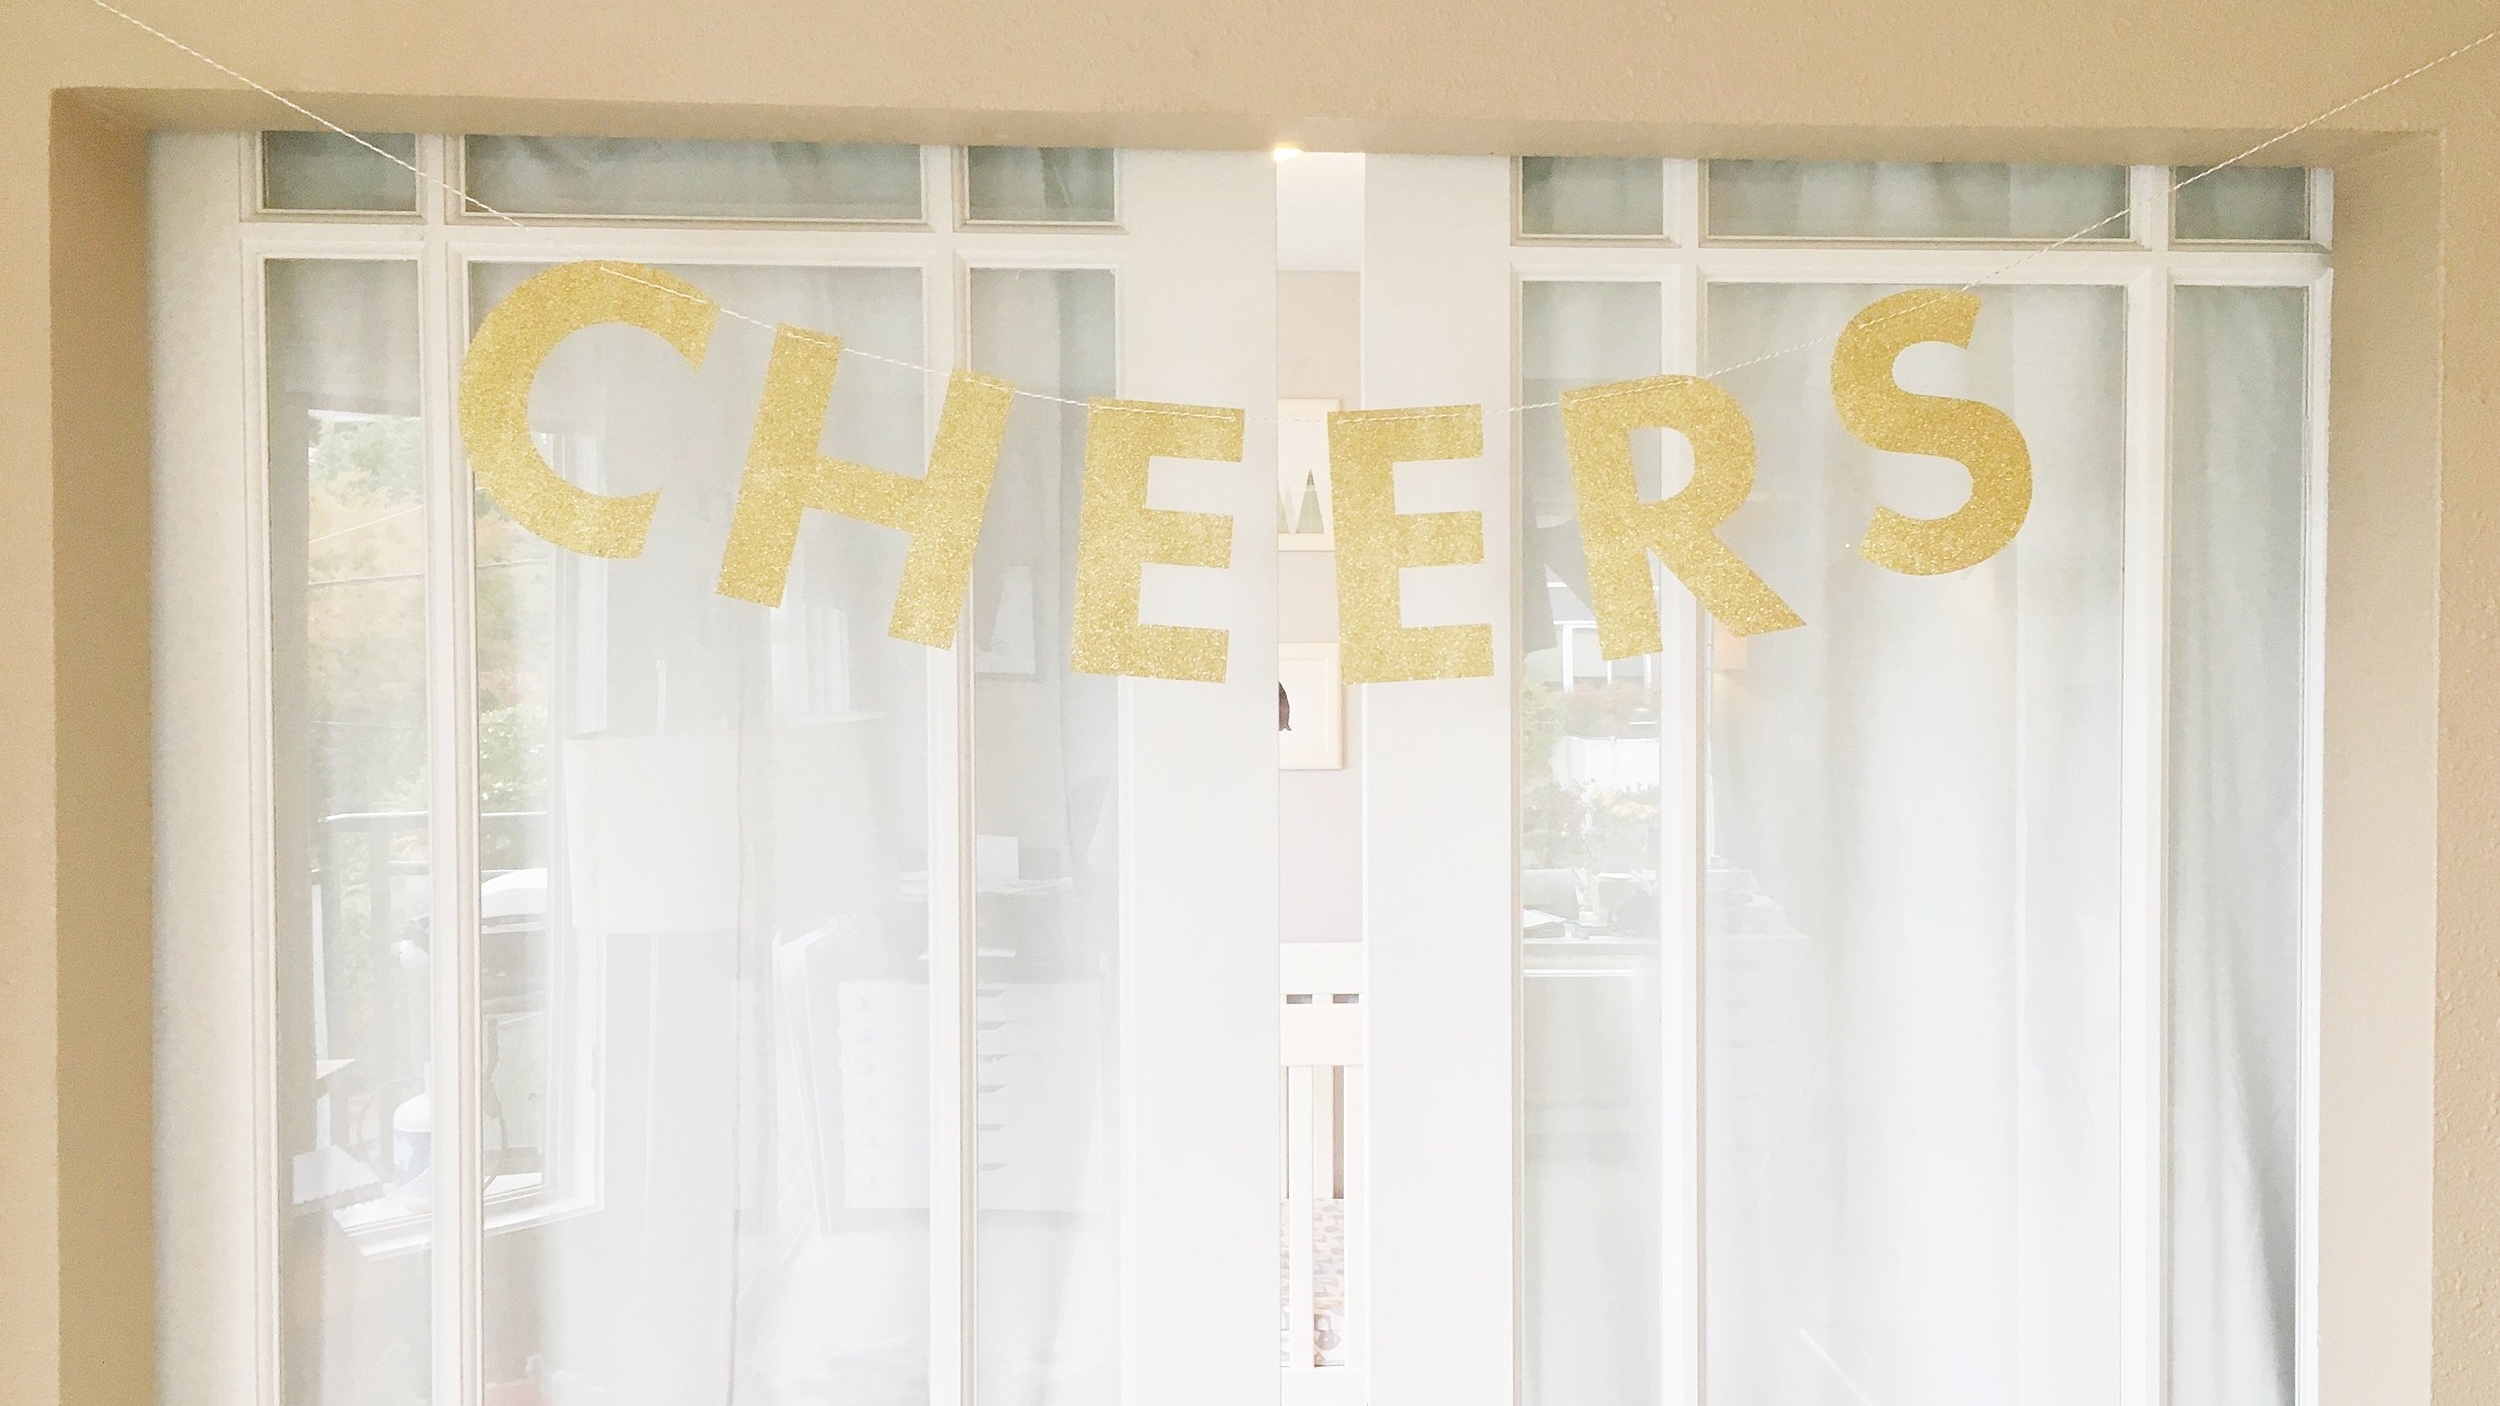 CHEERS Banner